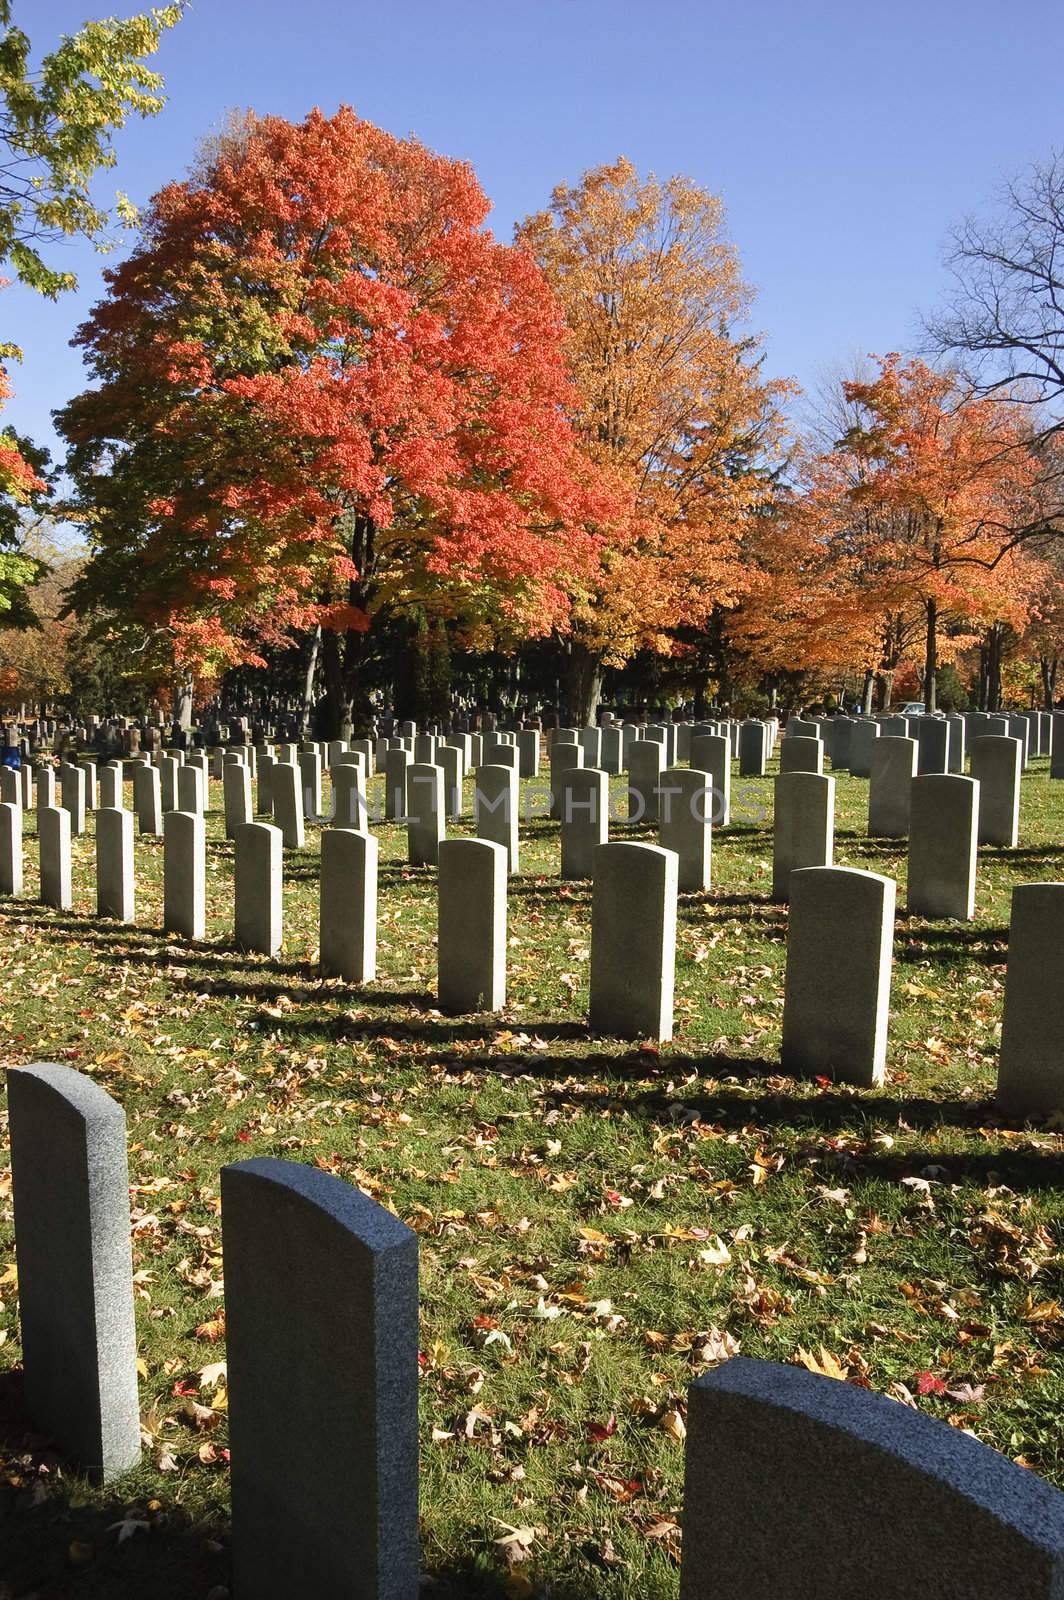 Rows of soldier tombstones on grassy field sprinkled with leaves with red maple trees in background contrasting against blue fall skies